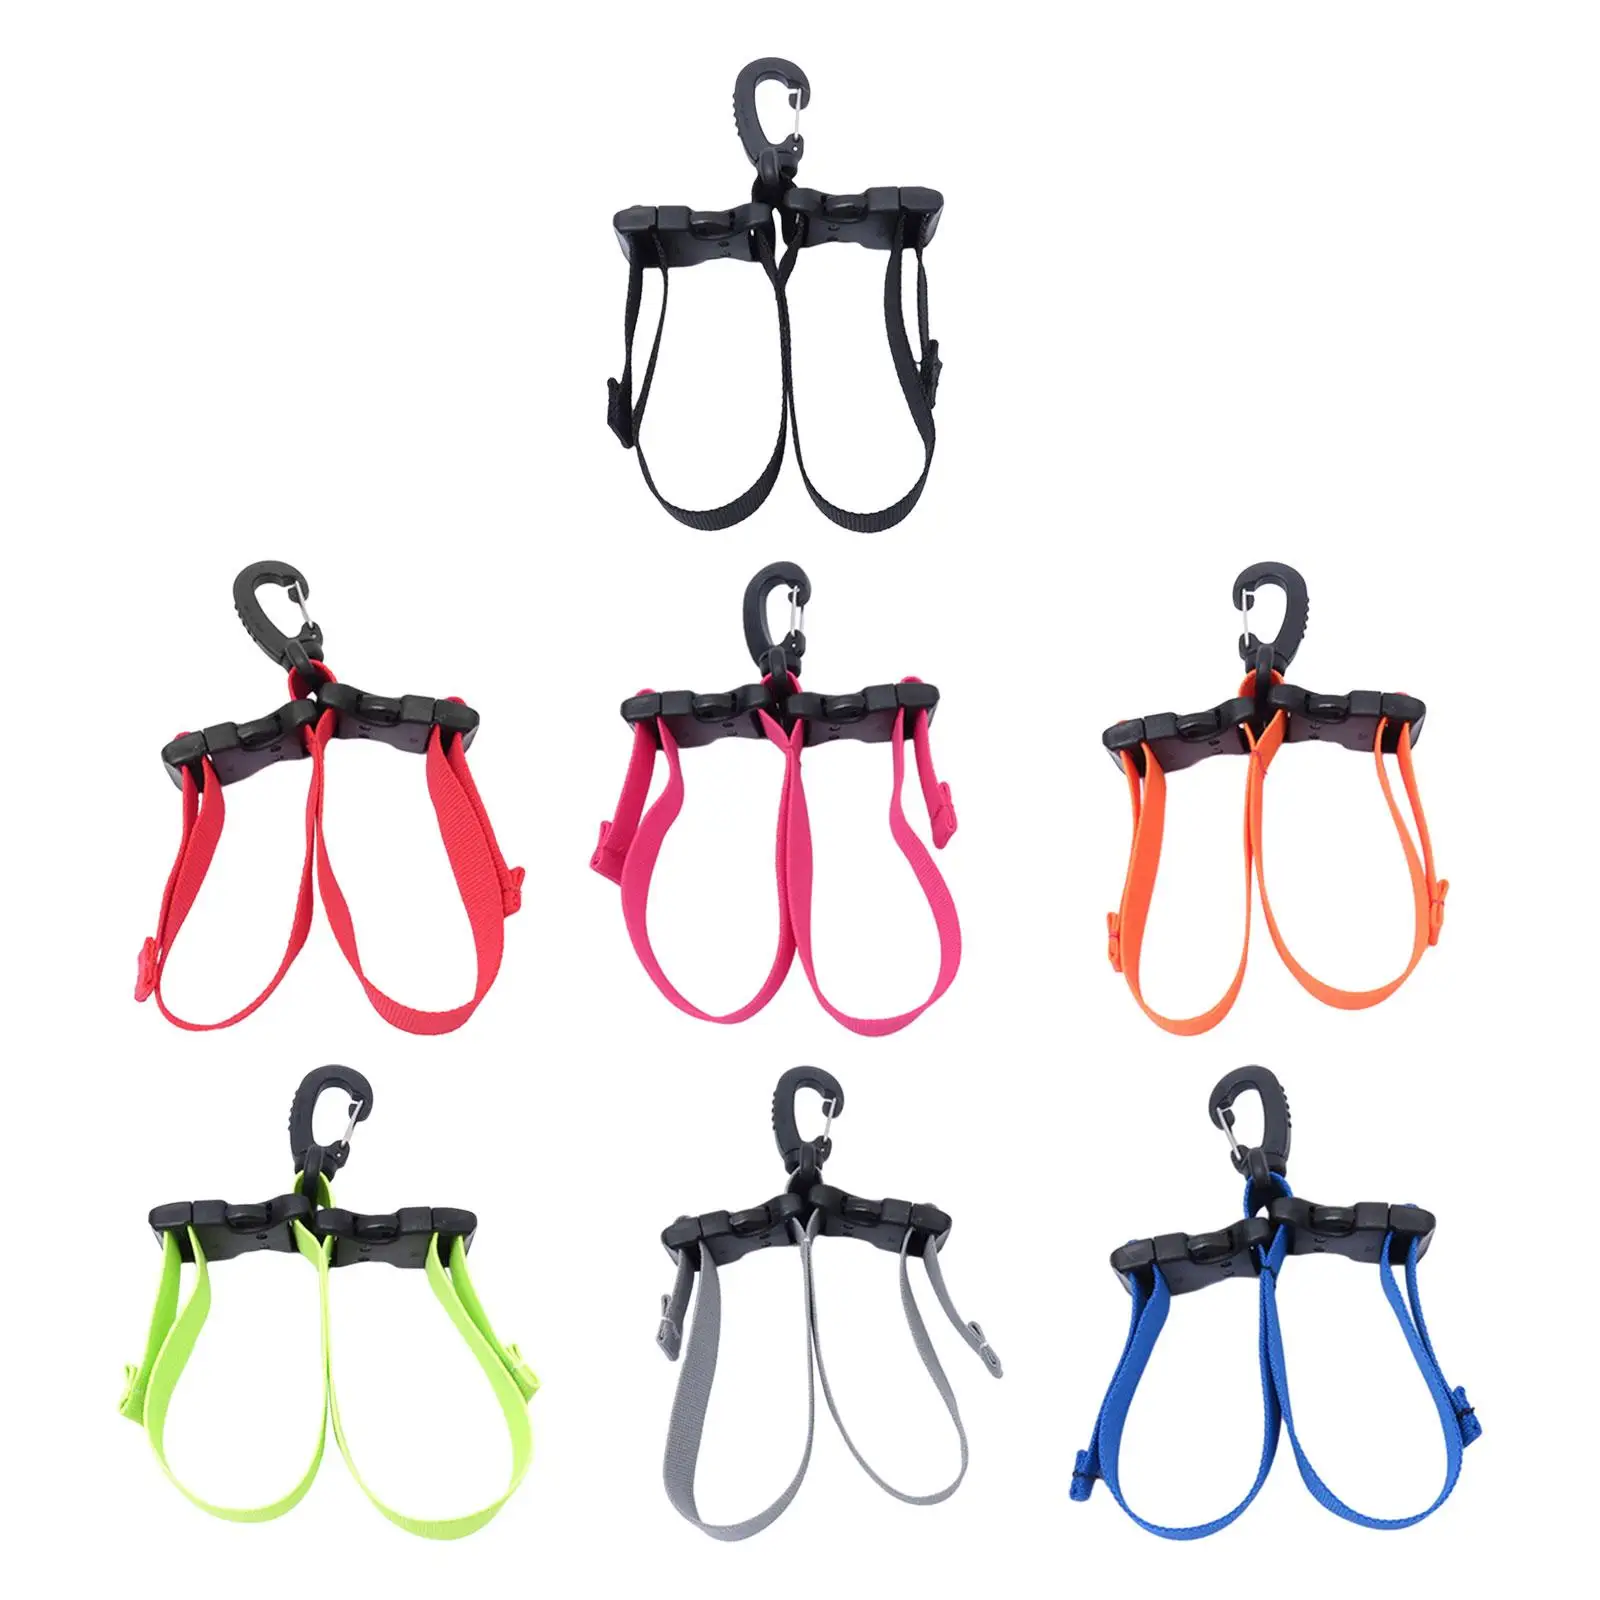 Diving Fins Strap Accessories, Scuba Fins Strap, Professional Swim Flippers Buckles, Snorkel Keeper Strap for Diving Boots